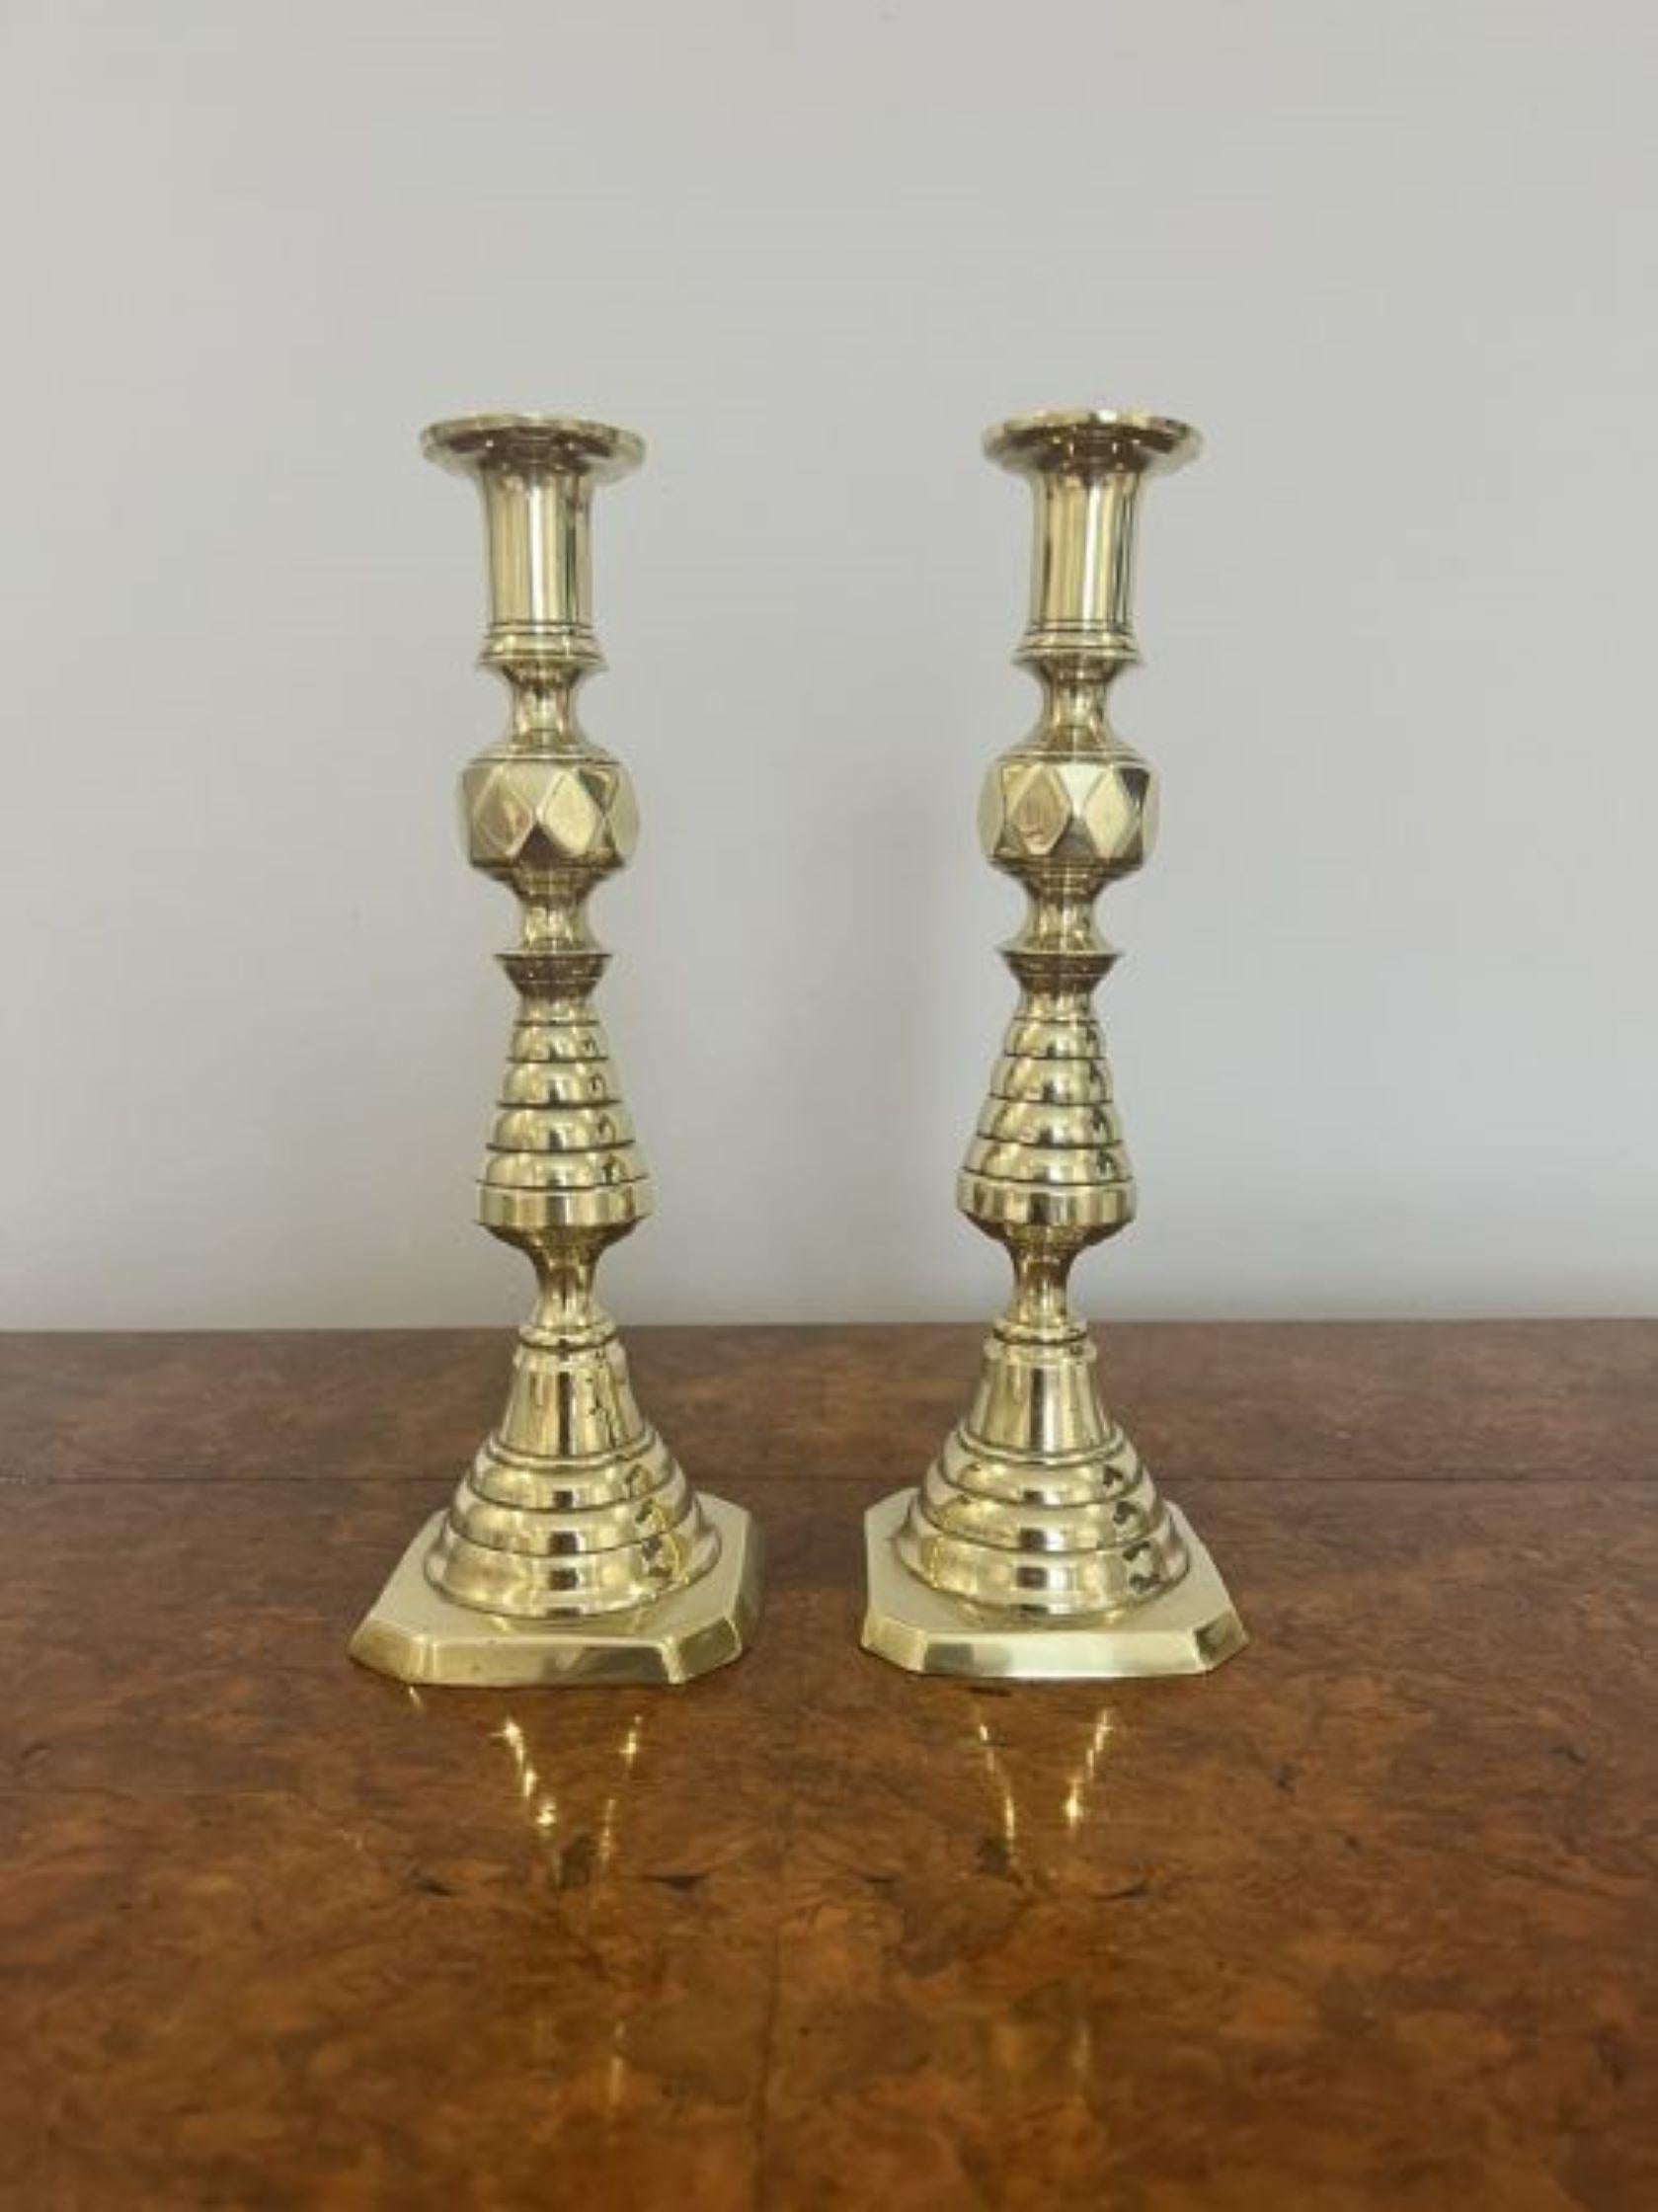 Quality pair of antique Victorian brass candlesticks having a quality pair of antique Victorian brass candlesticks with a turned shaped column standing on a stepped base. 